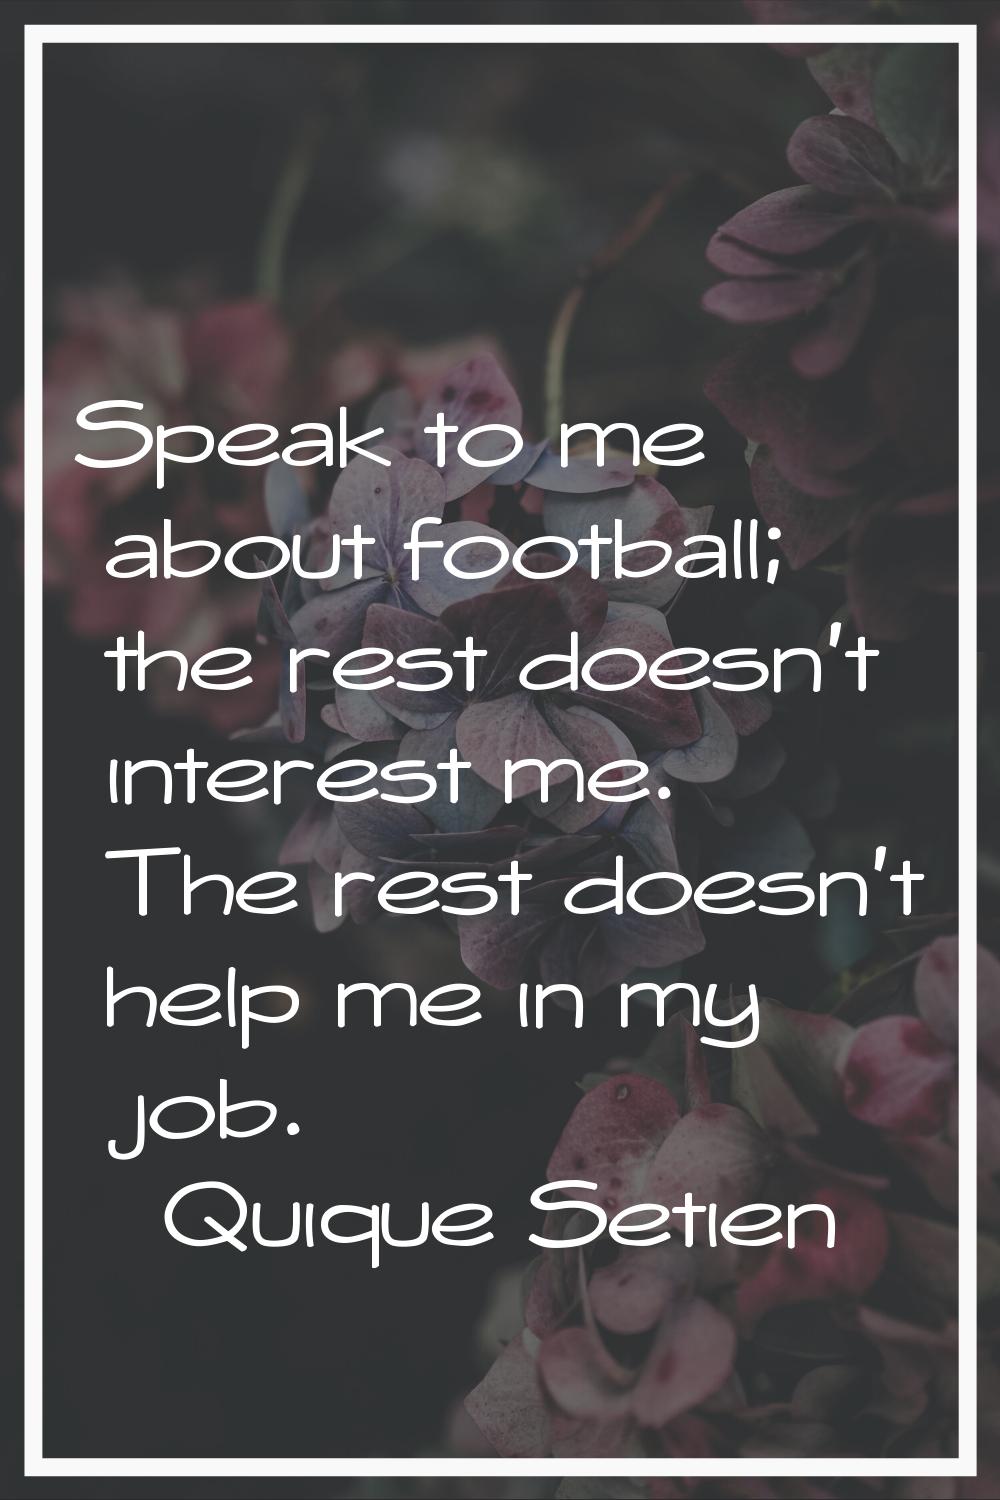 Speak to me about football; the rest doesn't interest me. The rest doesn't help me in my job.